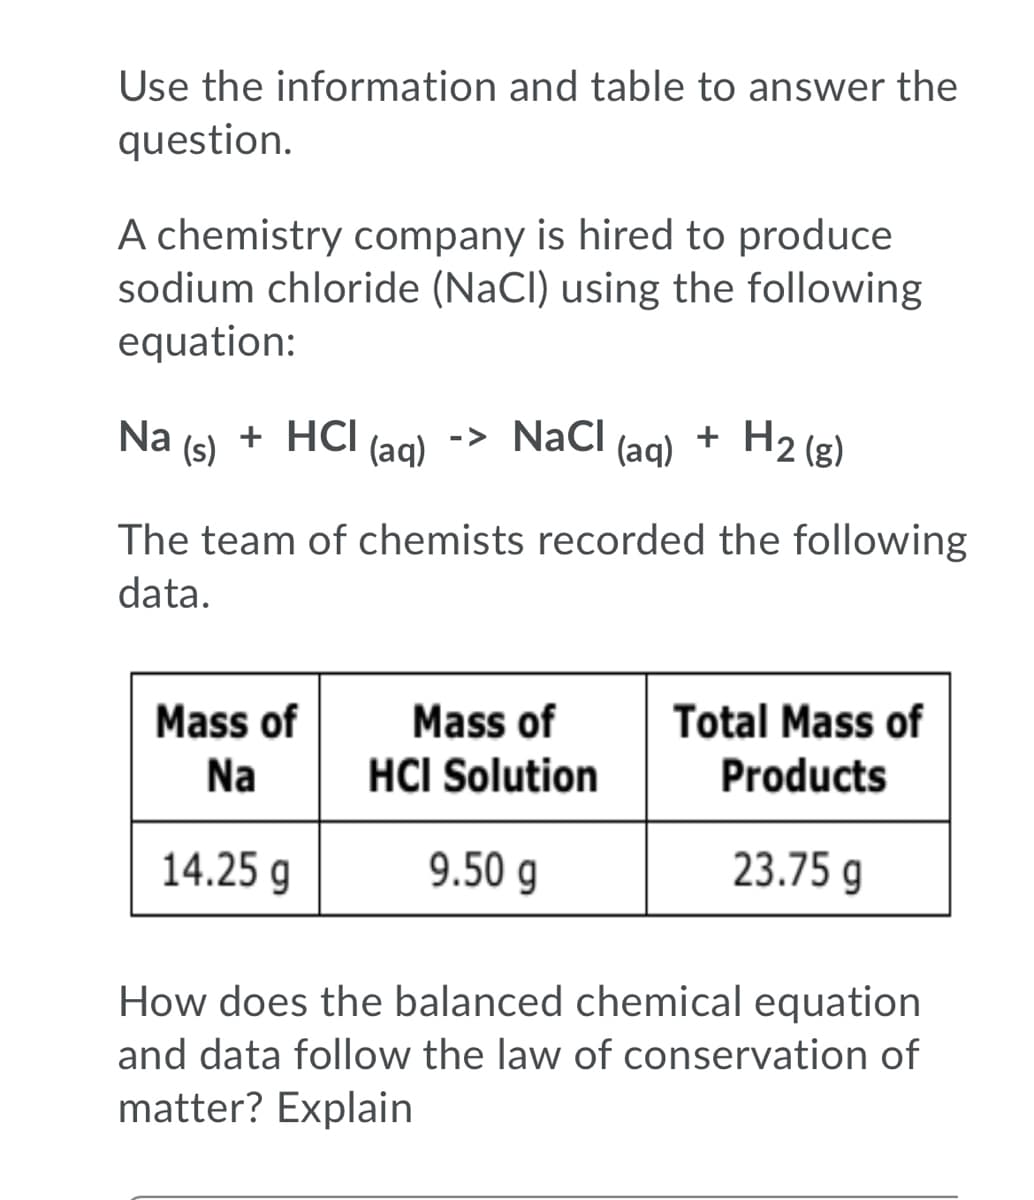 Use the information and table to answer the
question.
A chemistry company is hired to produce
sodium chloride (NaCl) using the following
equation:
Na
(s)
+ HCI
+ HCI (ag) -> NaCl
(aq)
+ H2 (8)
The team of chemists recorded the following
data.
Mass of
Mass of
Total Mass of
Na
HCI Solution
Products
14.25 g
9.50 g
23.75 g
How does the balanced chemical equation
and data follow the law of conservation of
matter? Explain
